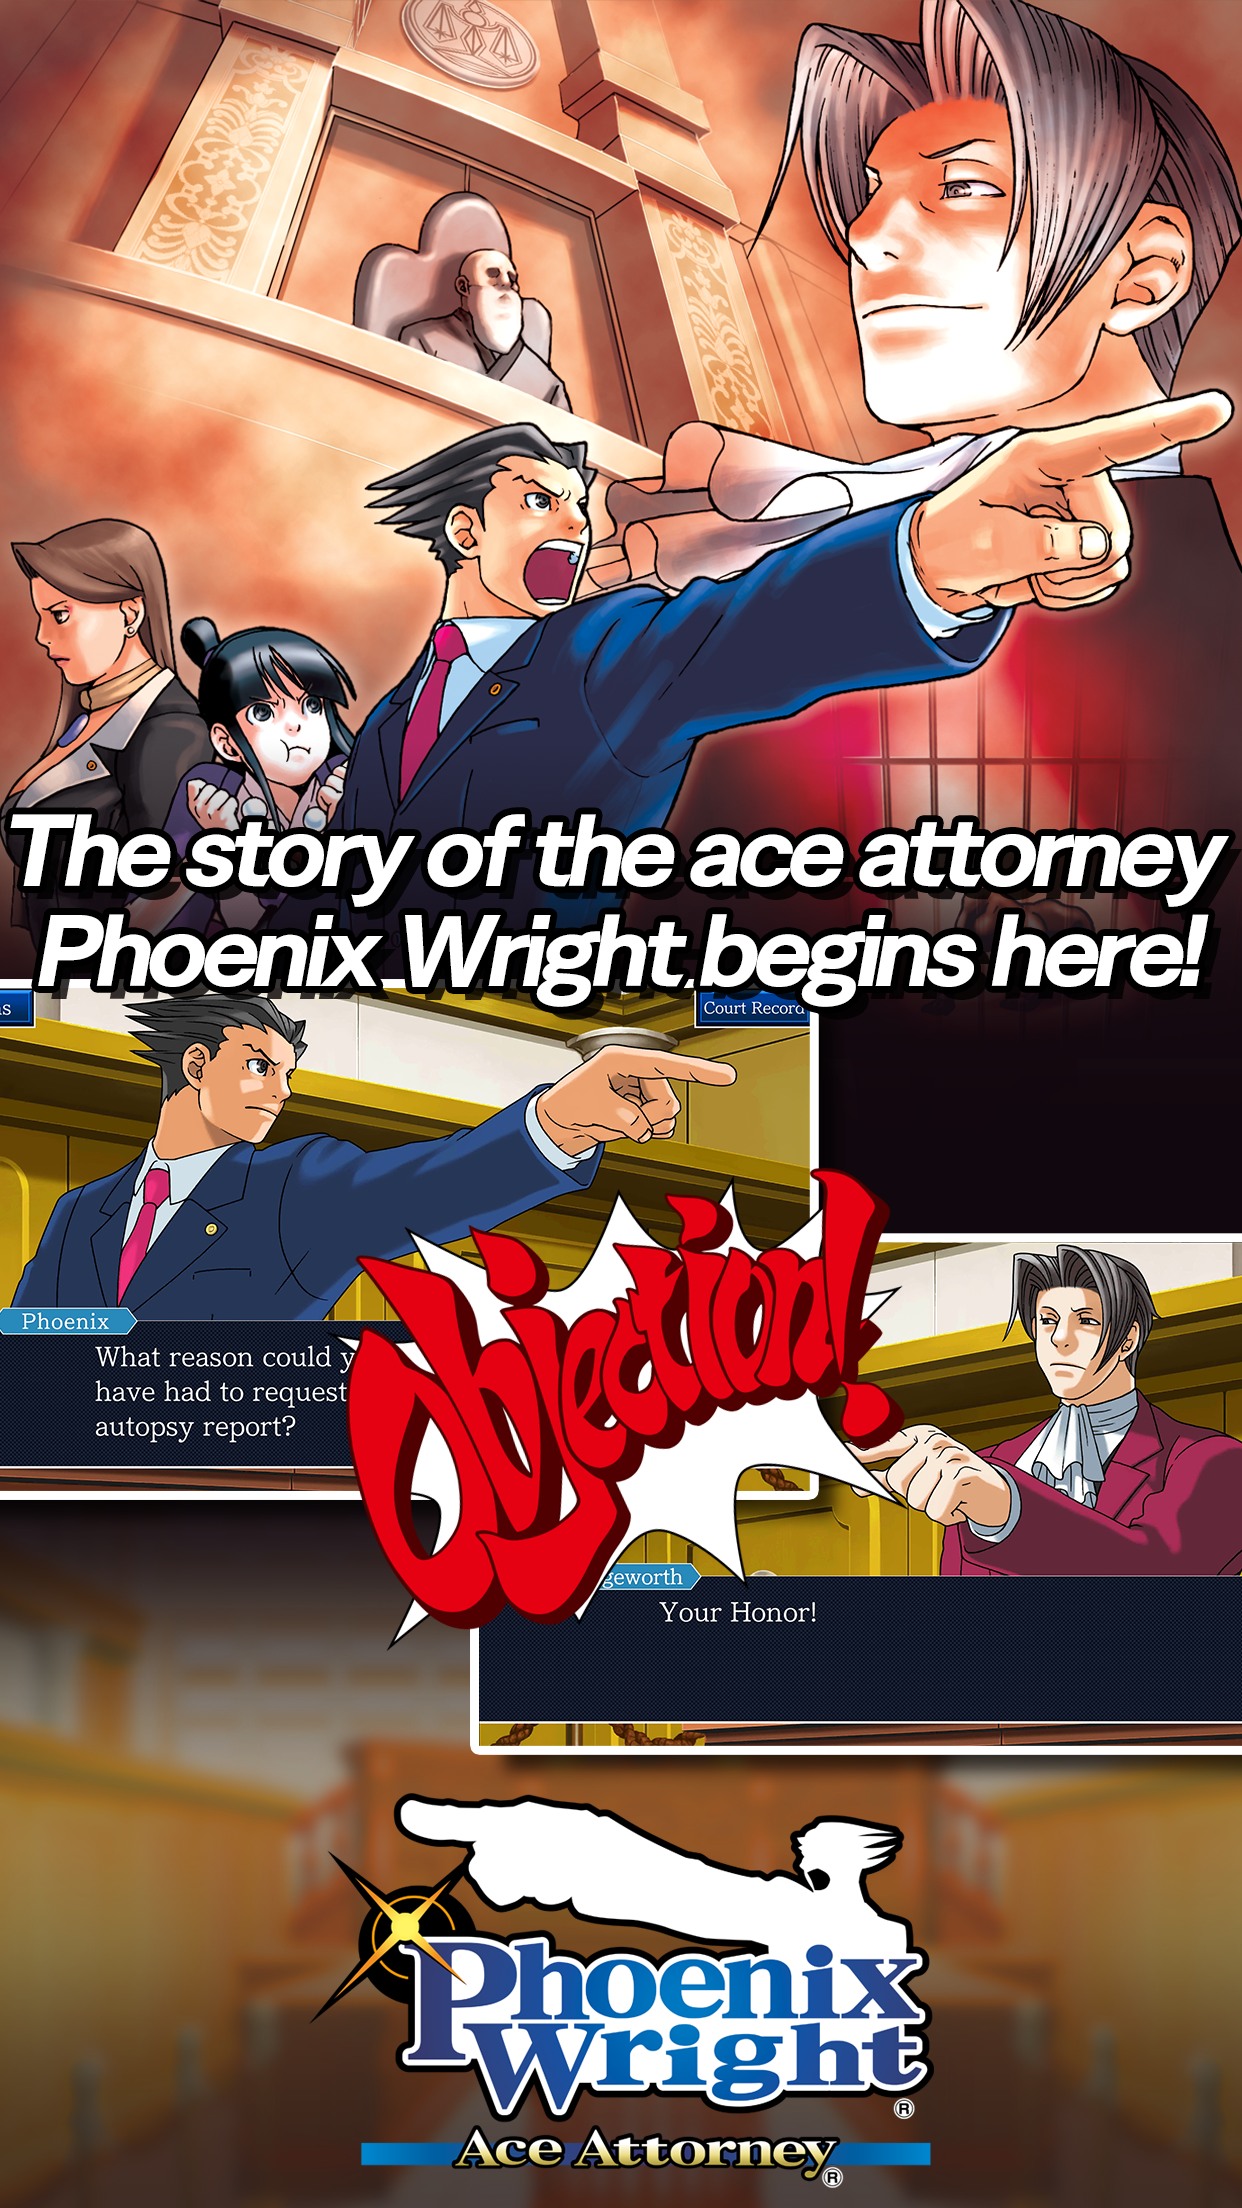 the best visual novels of the android trilogy Ace Attorney the story of Phoenix Wright starts here